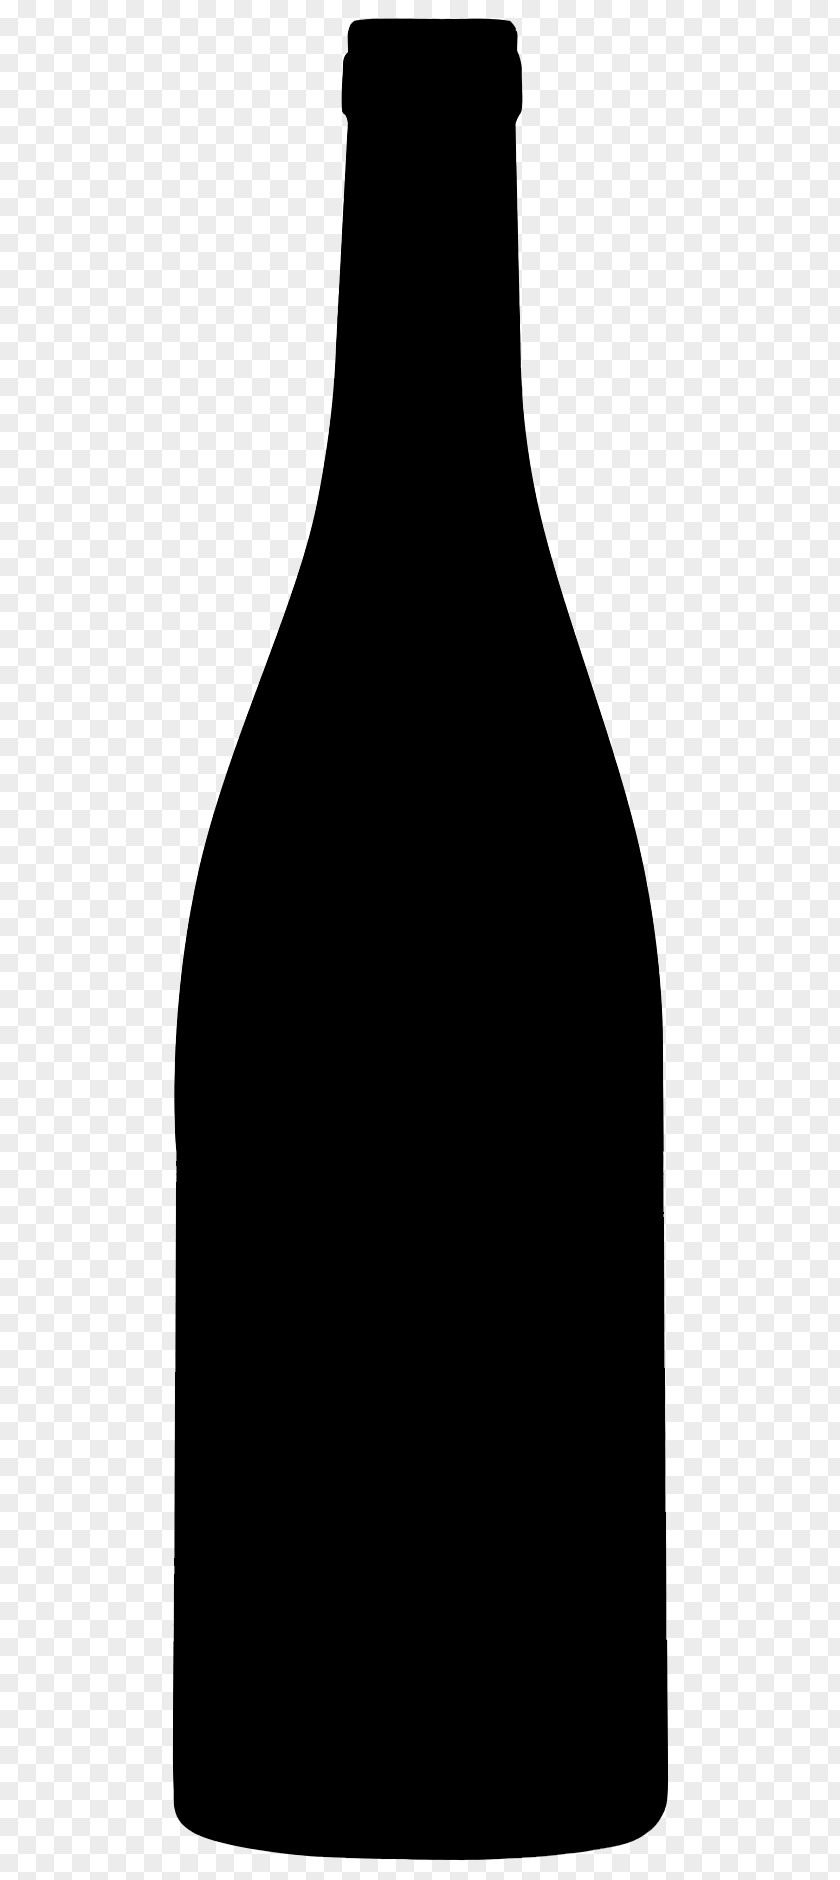 S.A. Damm Wine Product Design Glass Bottle PNG